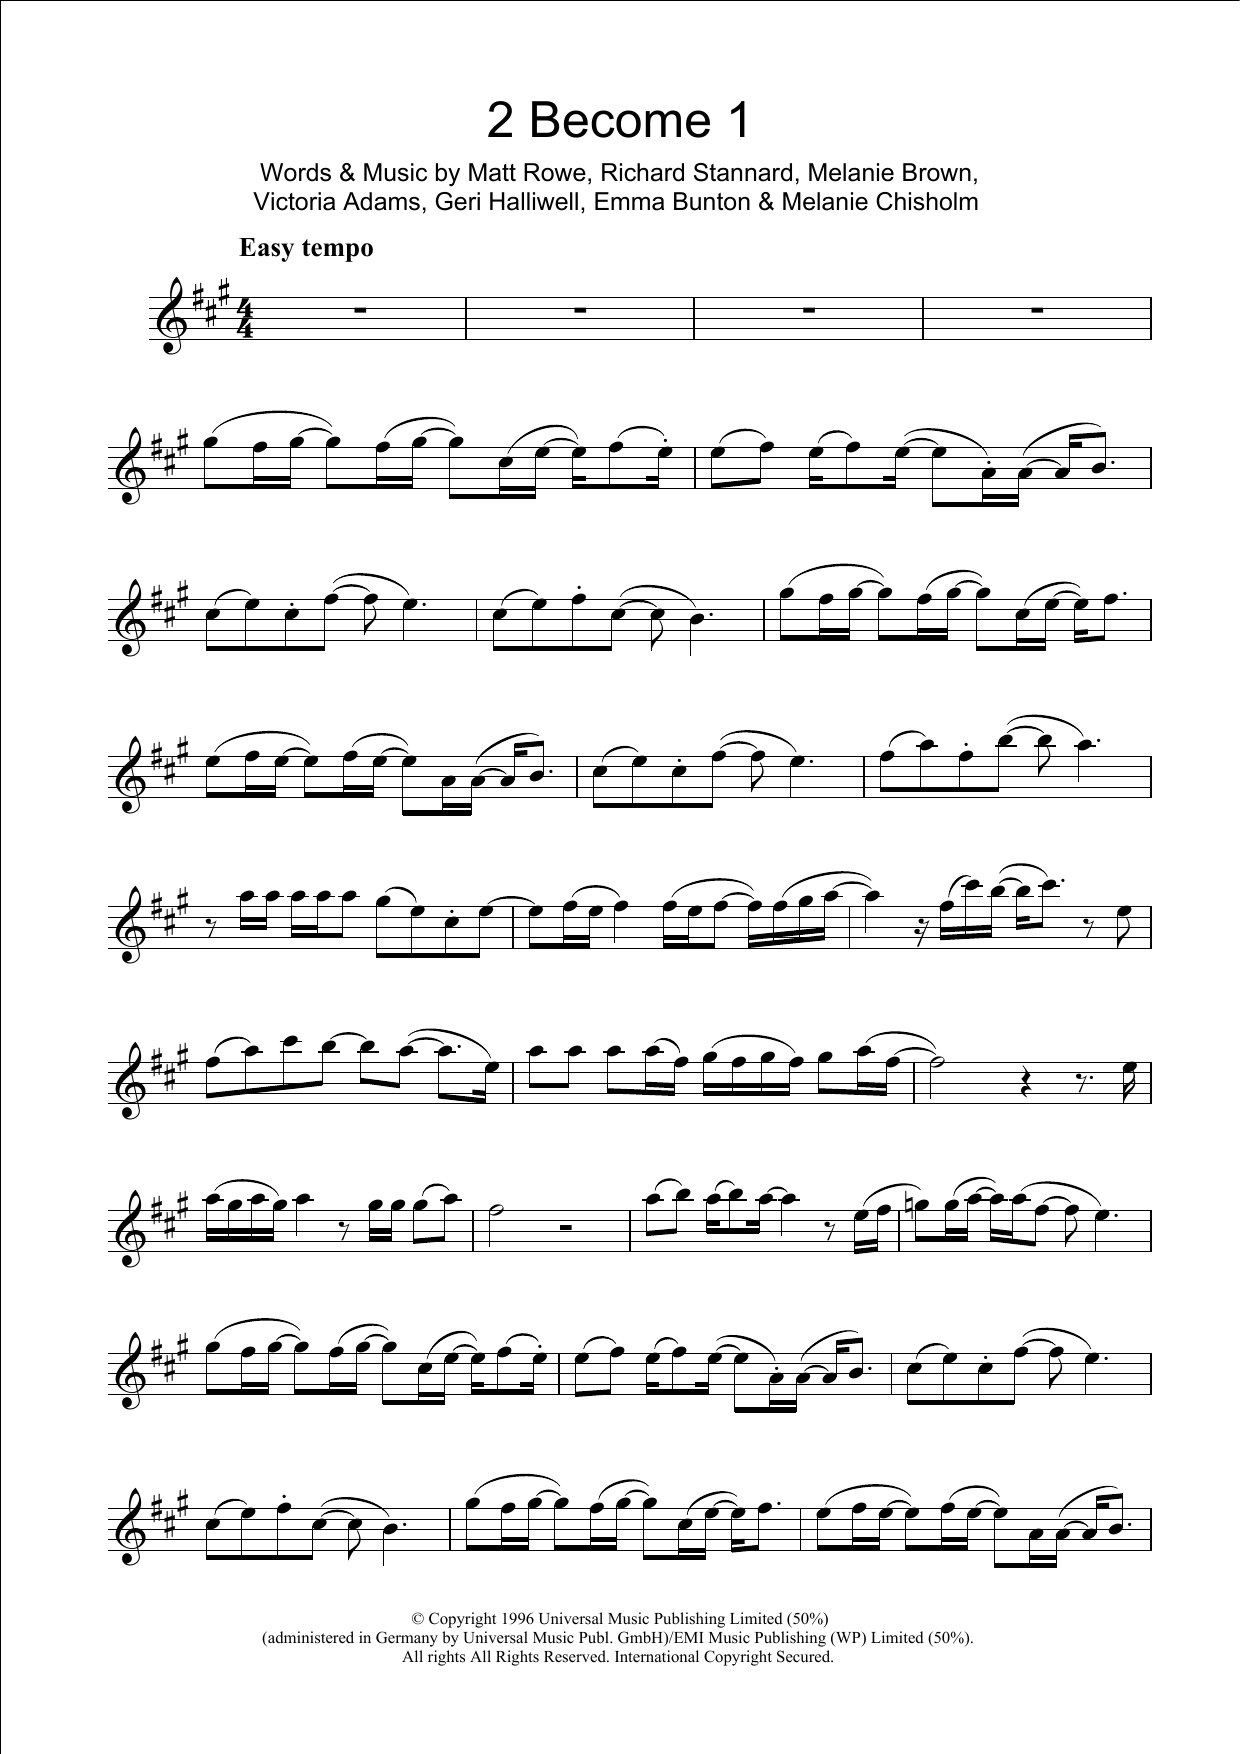 Download The Spice Girls 2 Become 1 Sheet Music